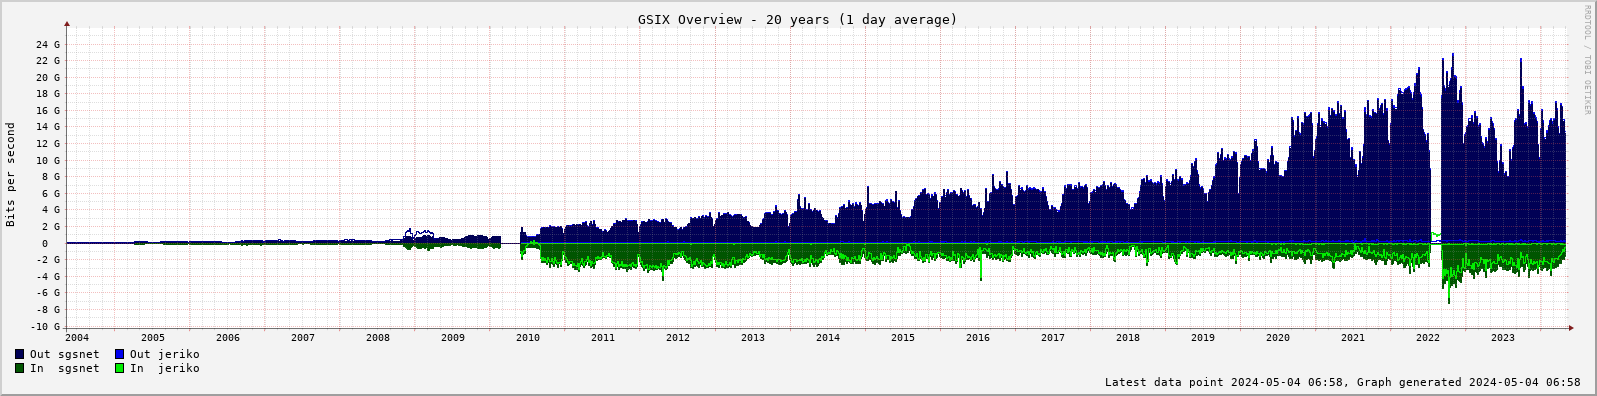 GSIX Overview 20 years